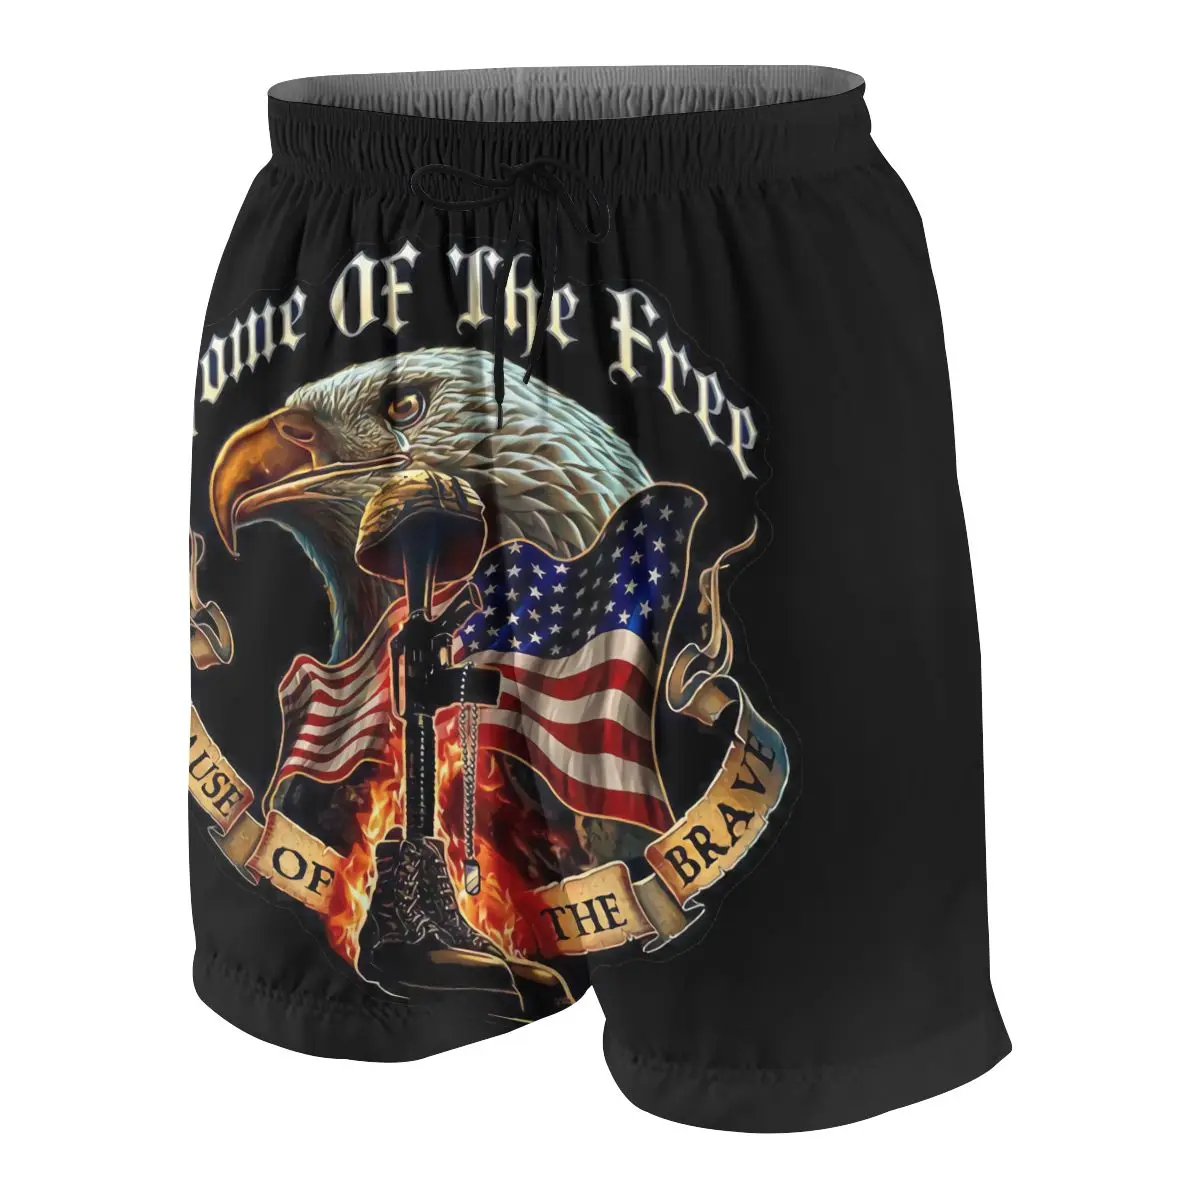 

Home Of The Free Because Of The Brave Youngsters Shorts Joggers Quick-dry Cool Short Pants Casual Beach Sweatpants